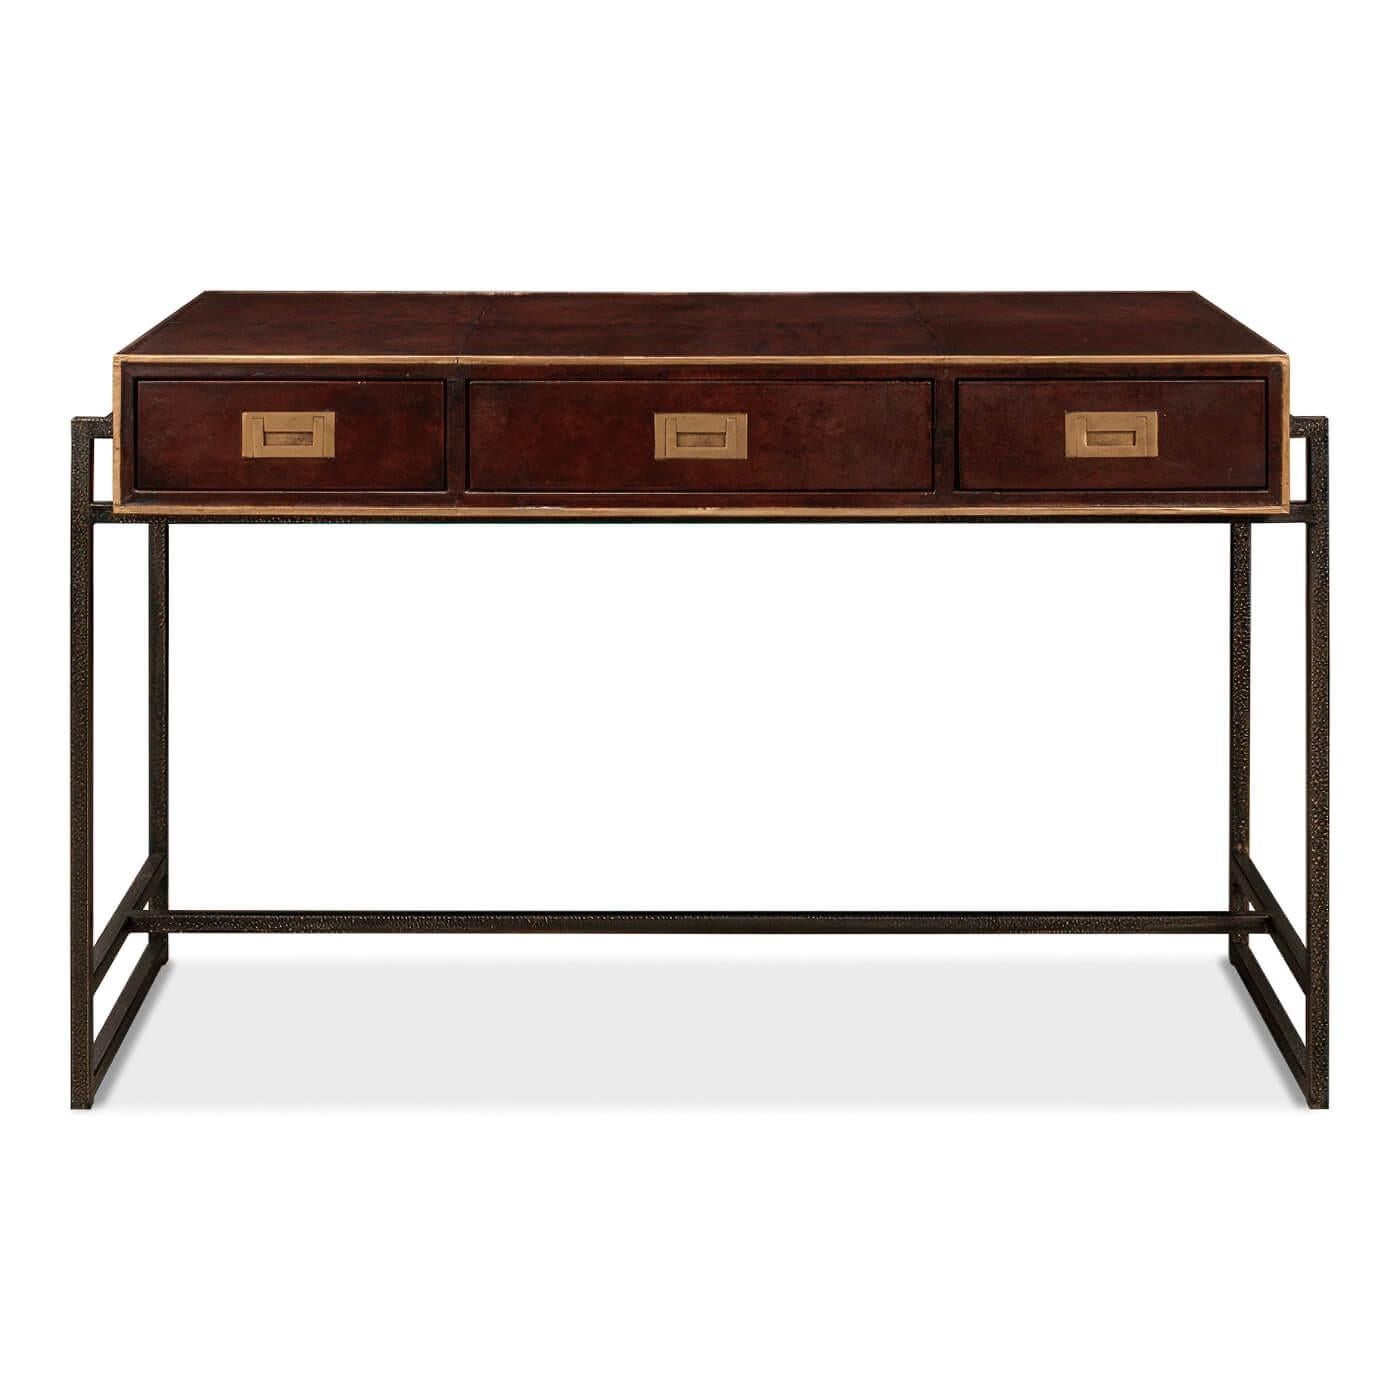 A modern industrial leather desk with a solid hammered metal base. It has three drawers accented with cast brass campaign drawer pulls.

Dimensions
49 in. W x 22 in. D x 31 in. H. 


